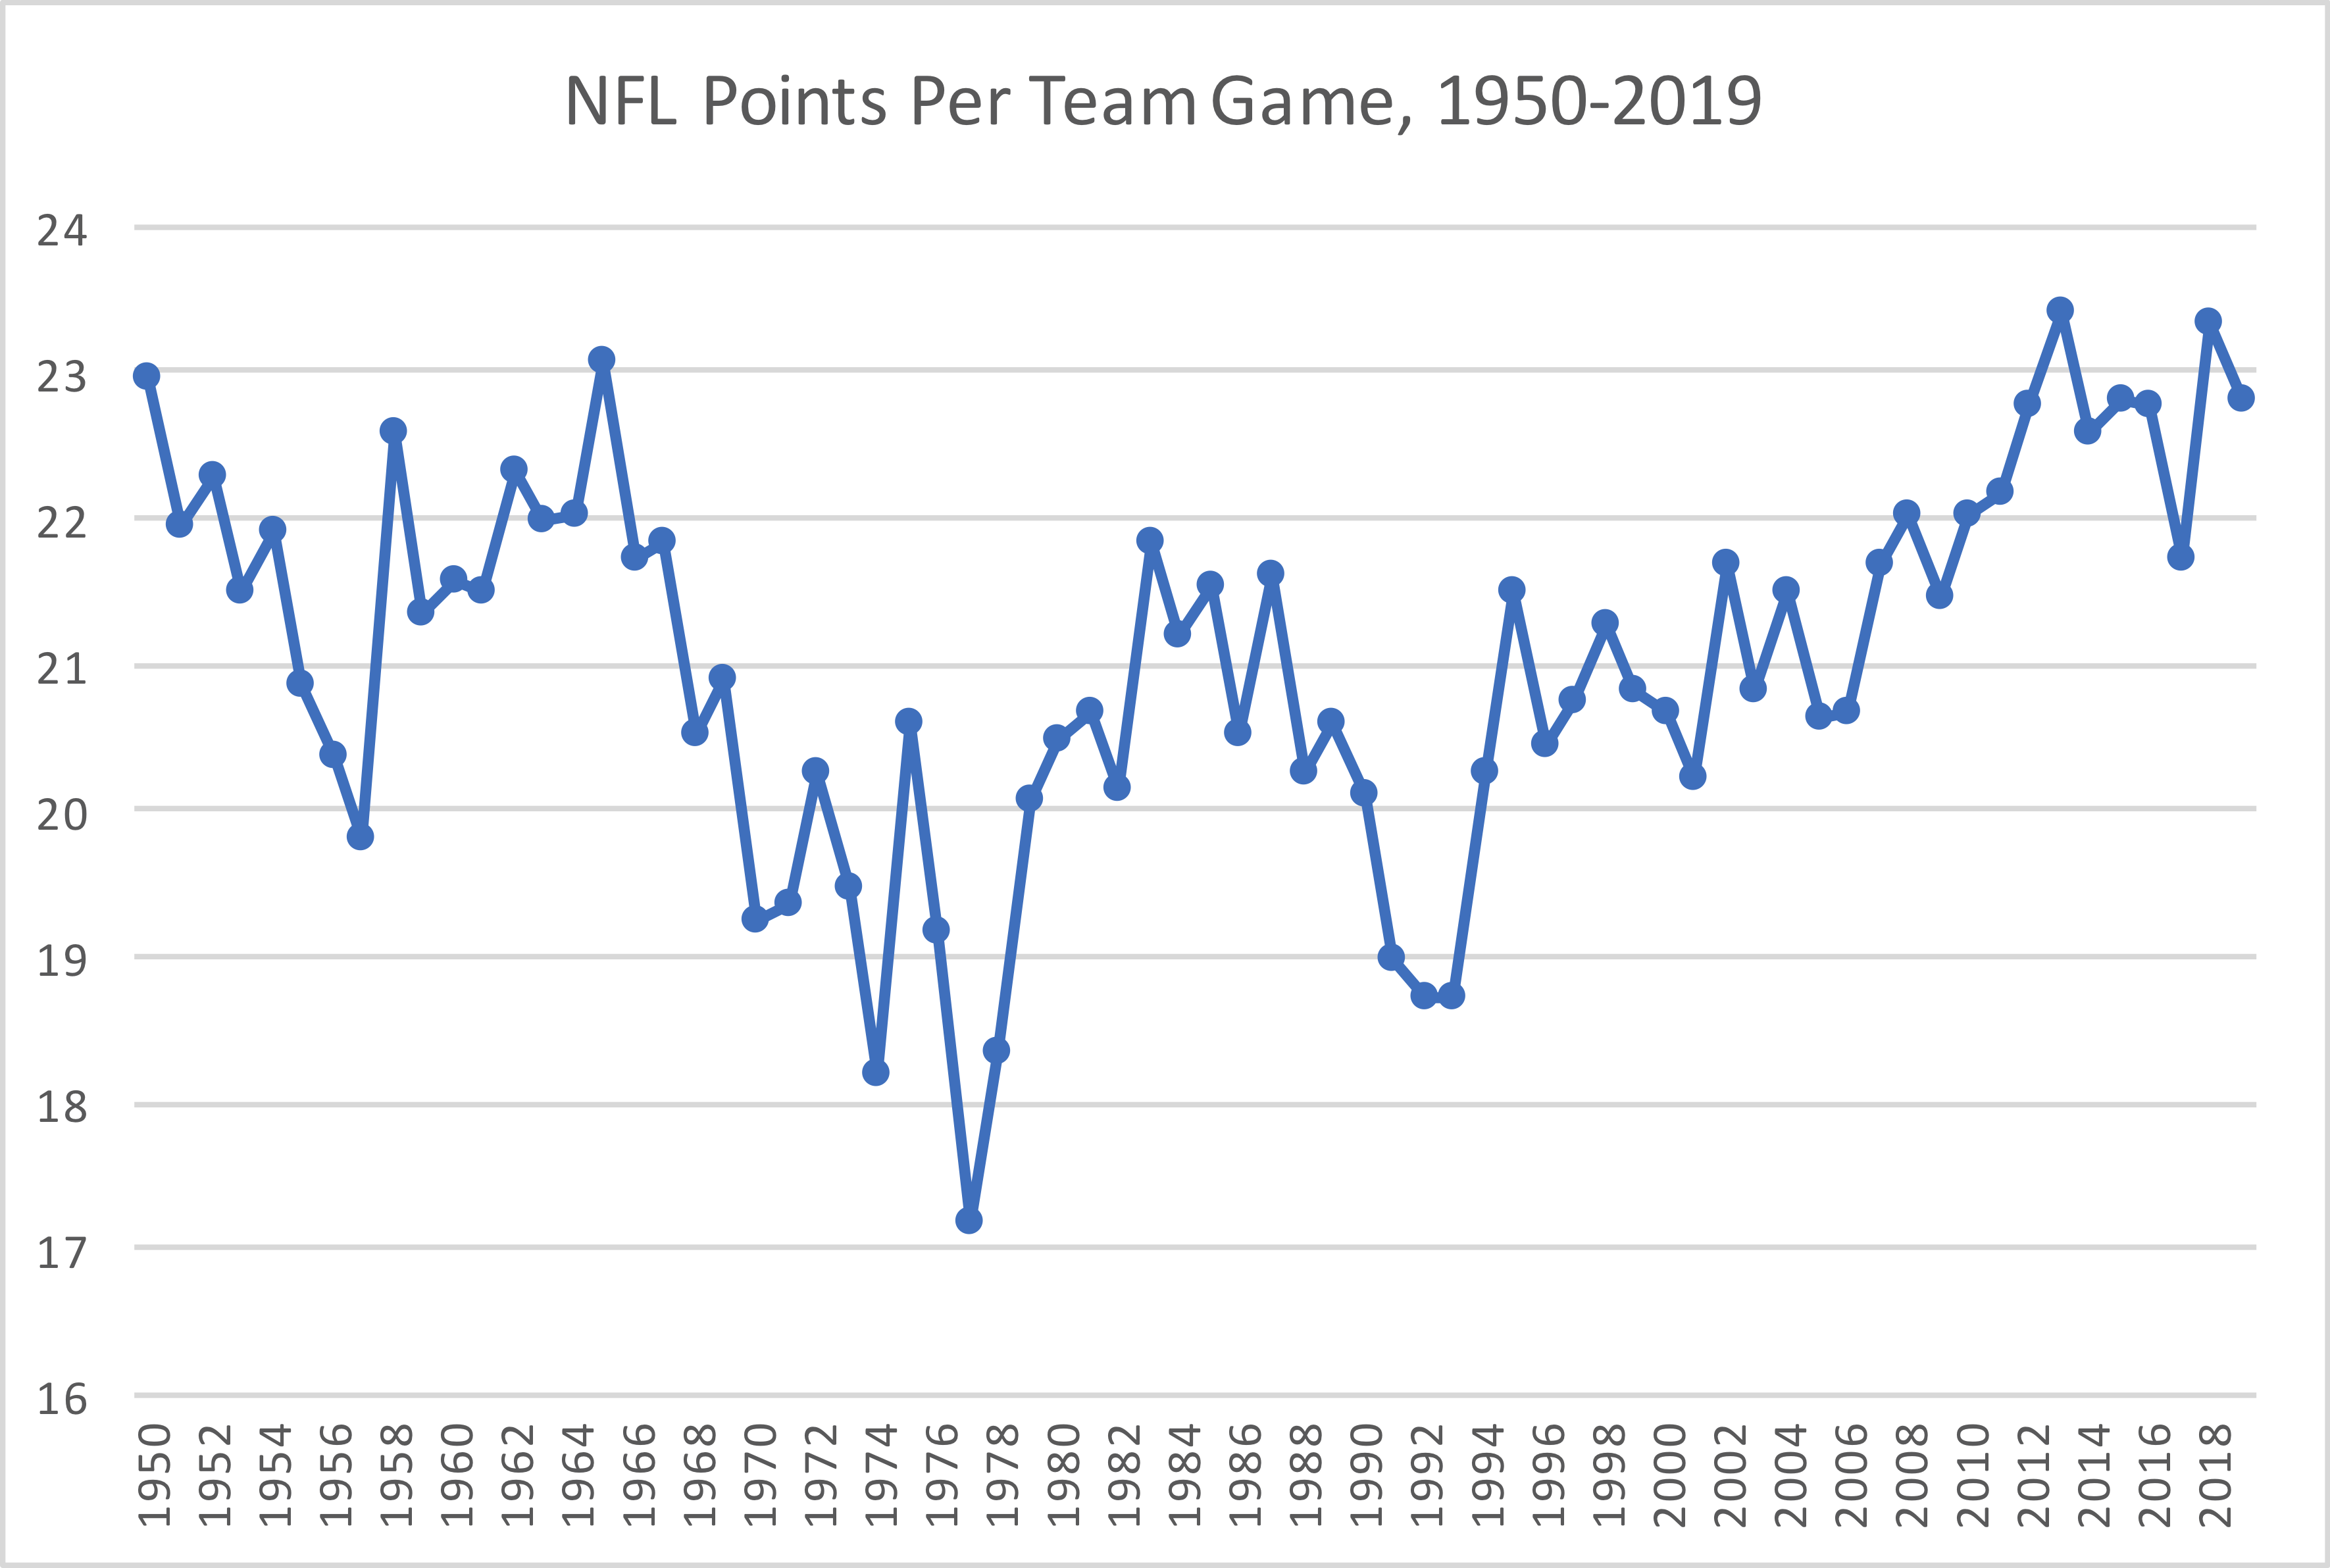 Scoring Distribution From 1950 to 2019